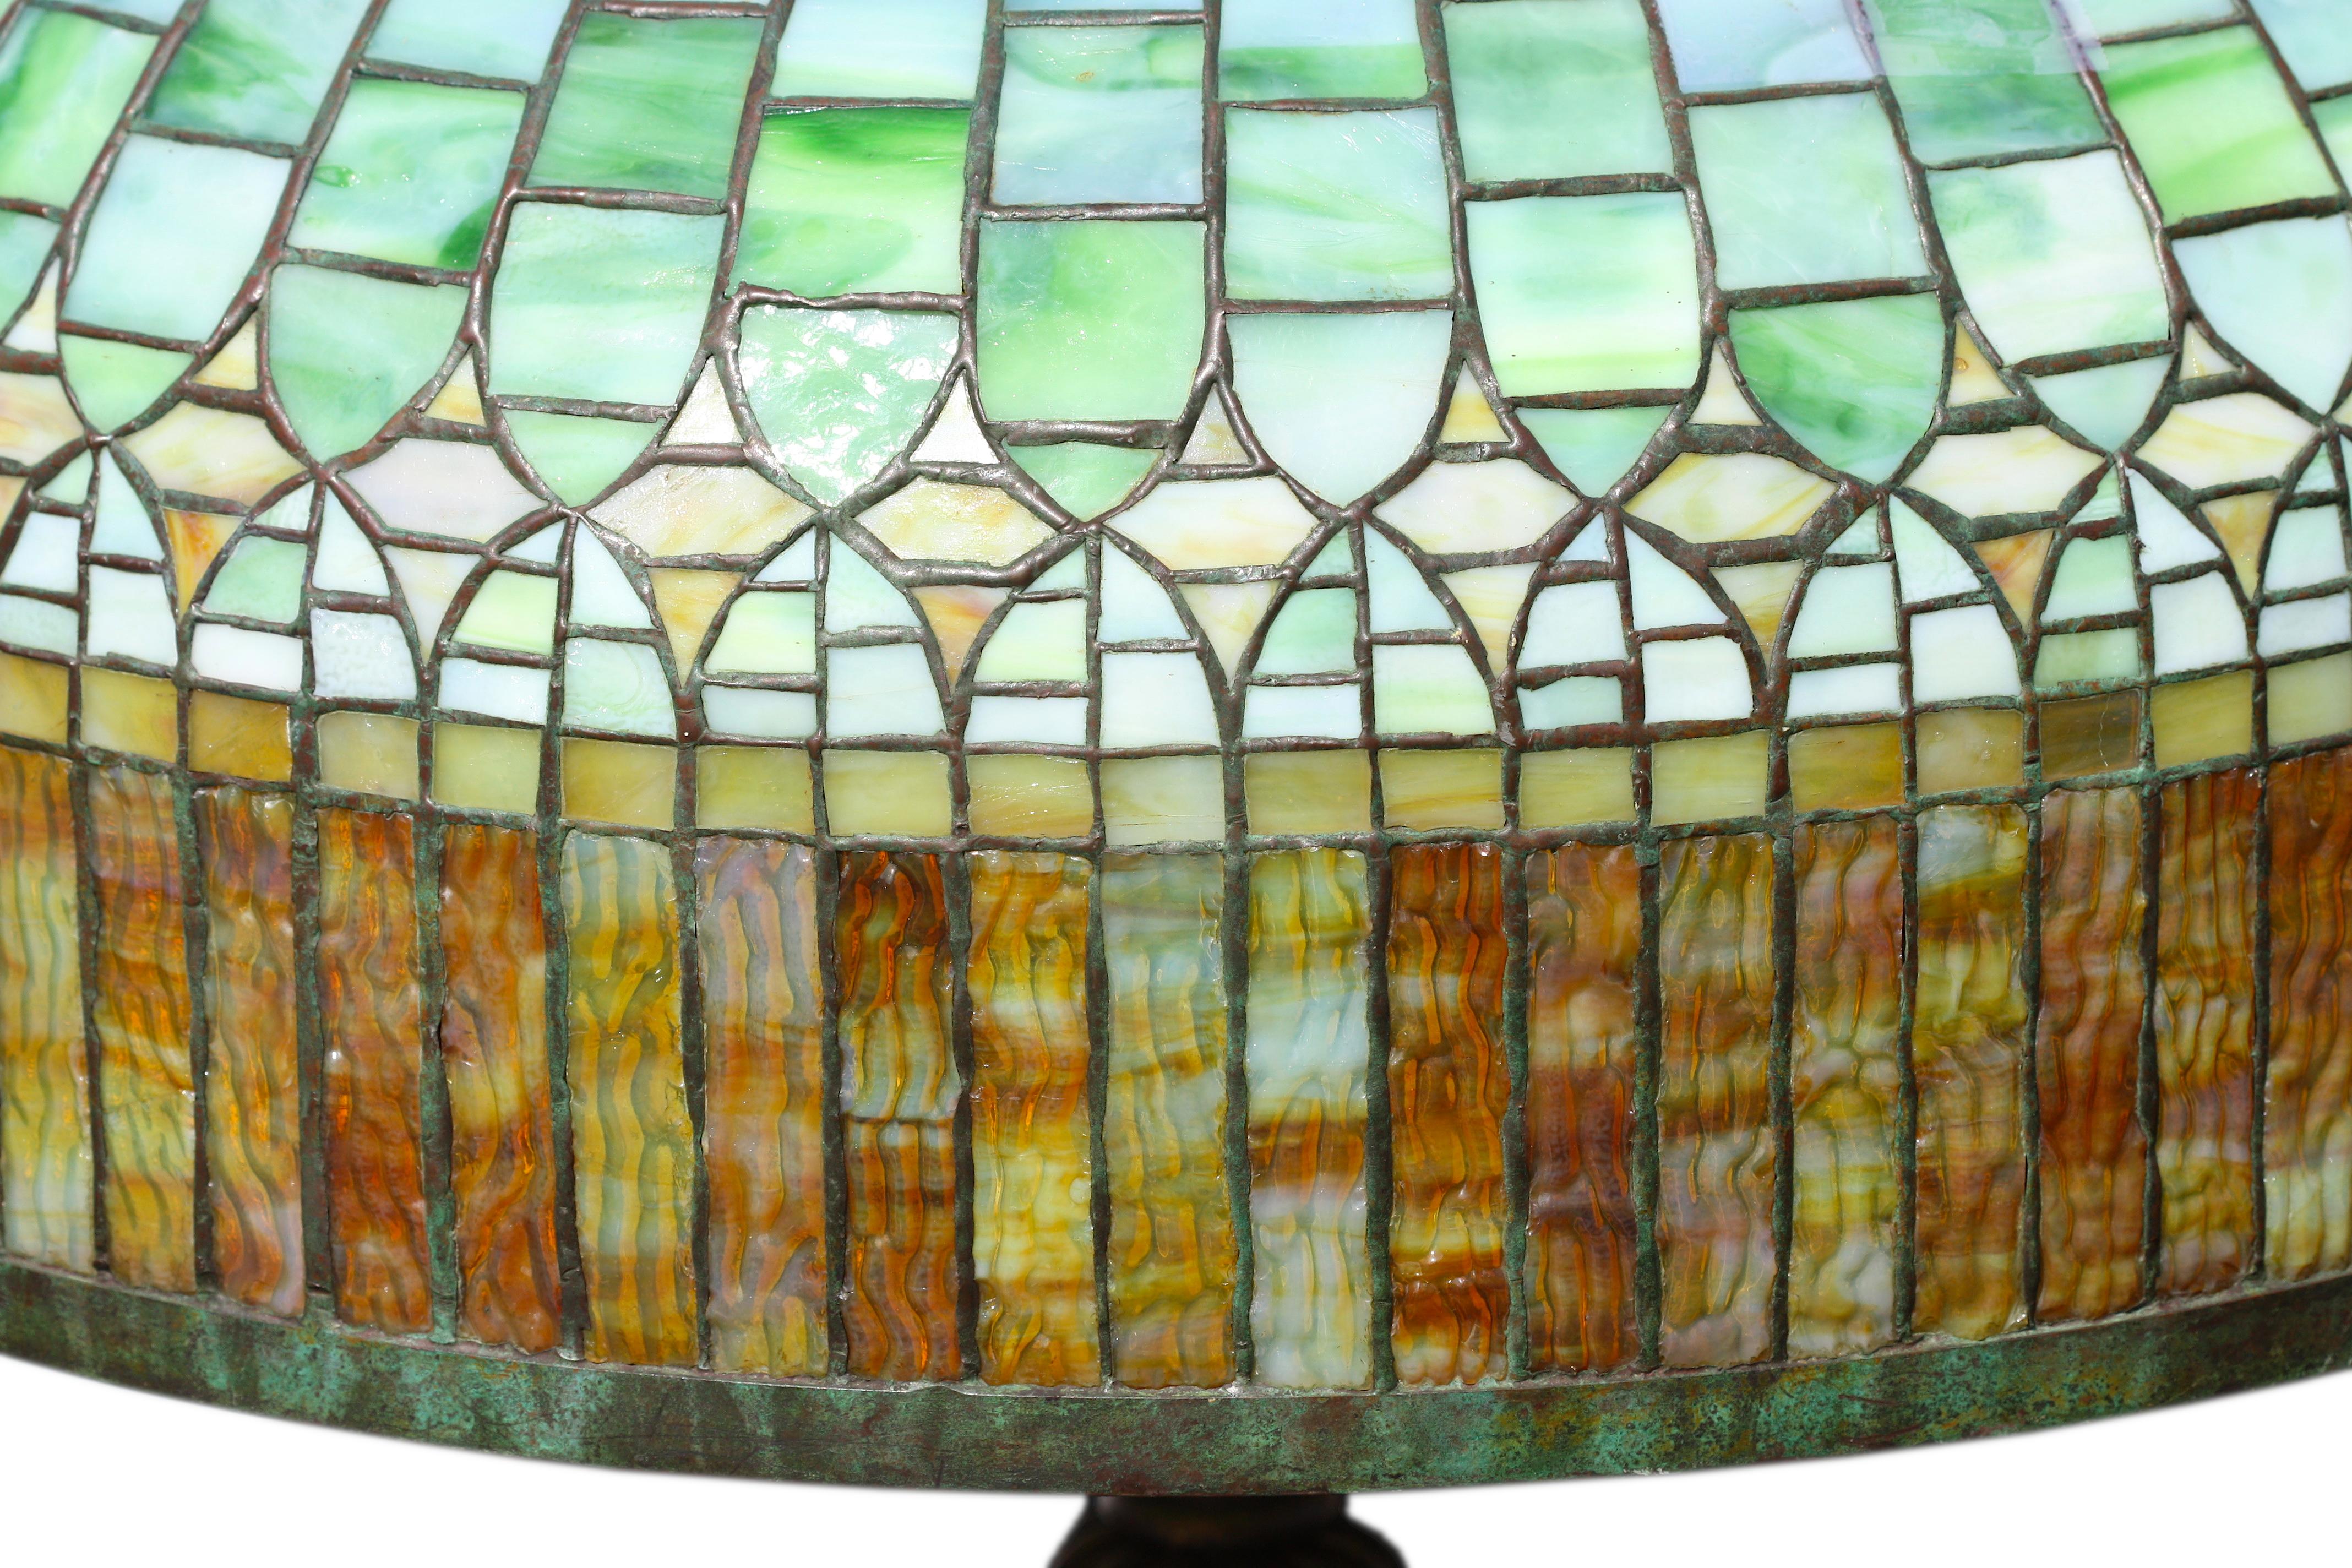 Tiffany Studios “Curtain Border” Floor Lamp 1899-1920 In Good Condition For Sale In West Palm Beach, FL